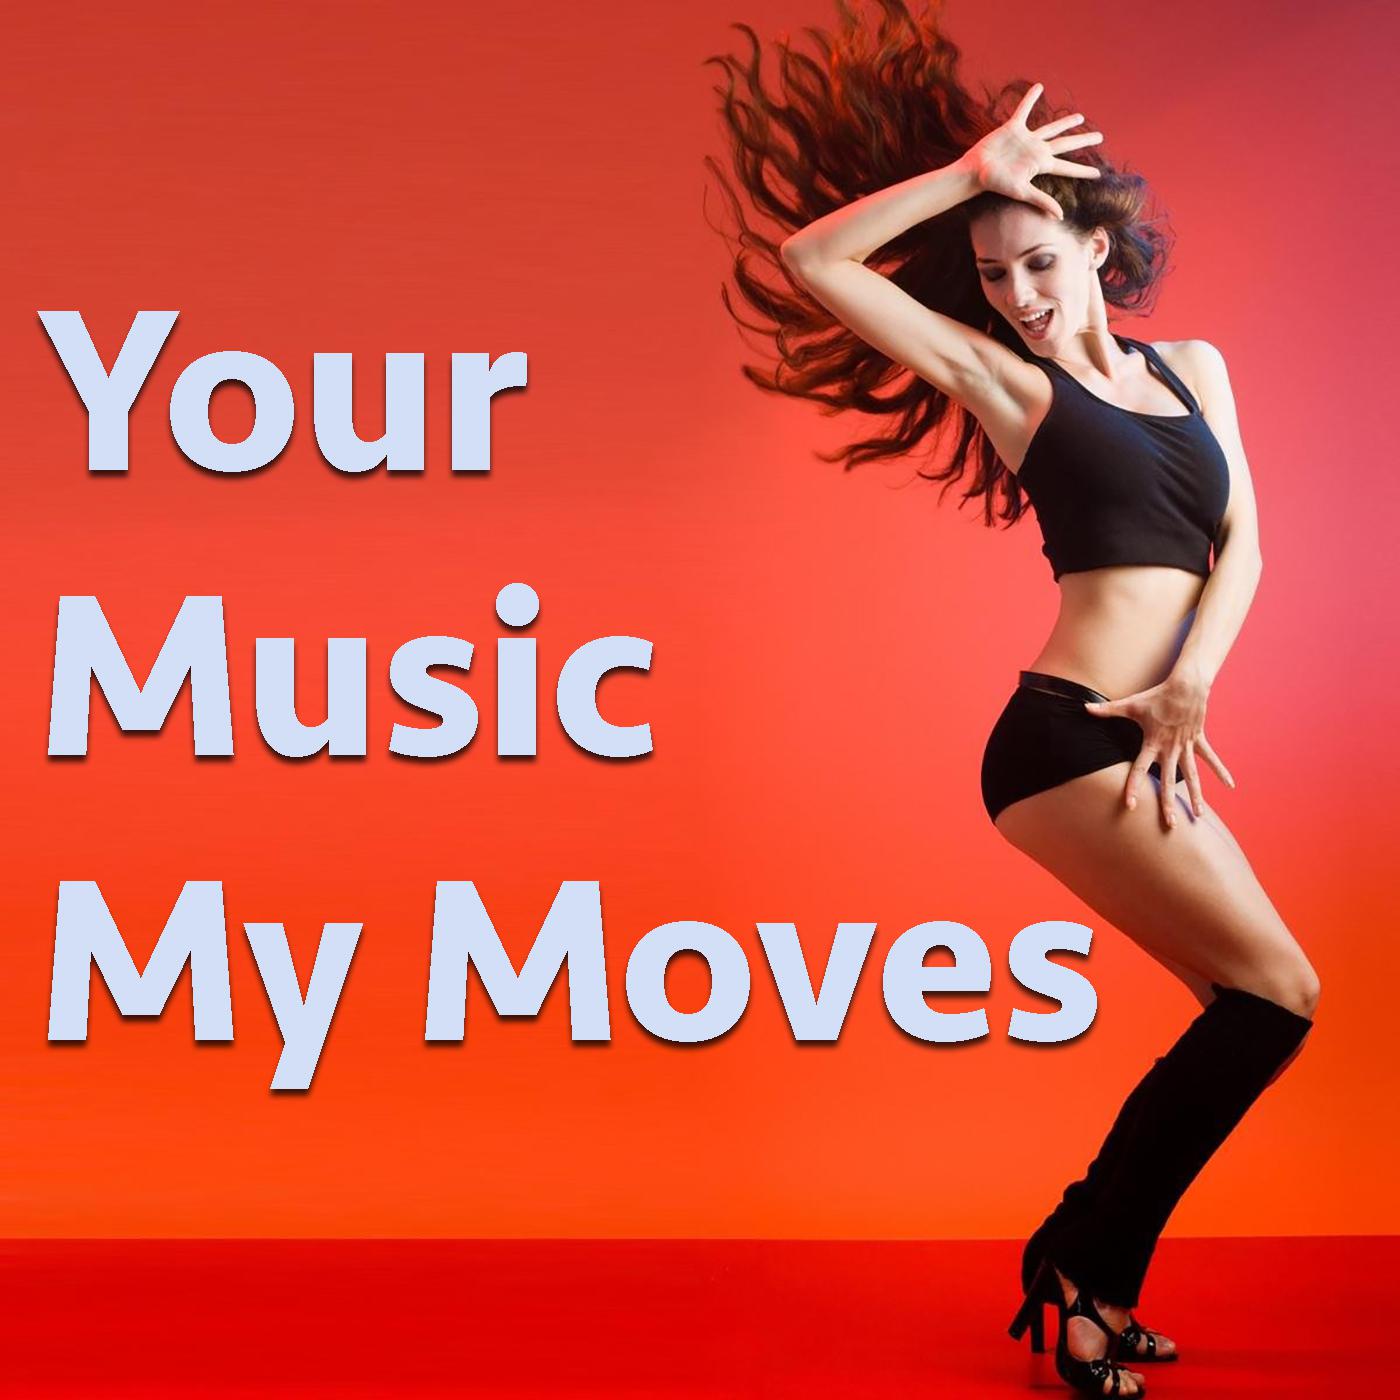 Your Music My Moves